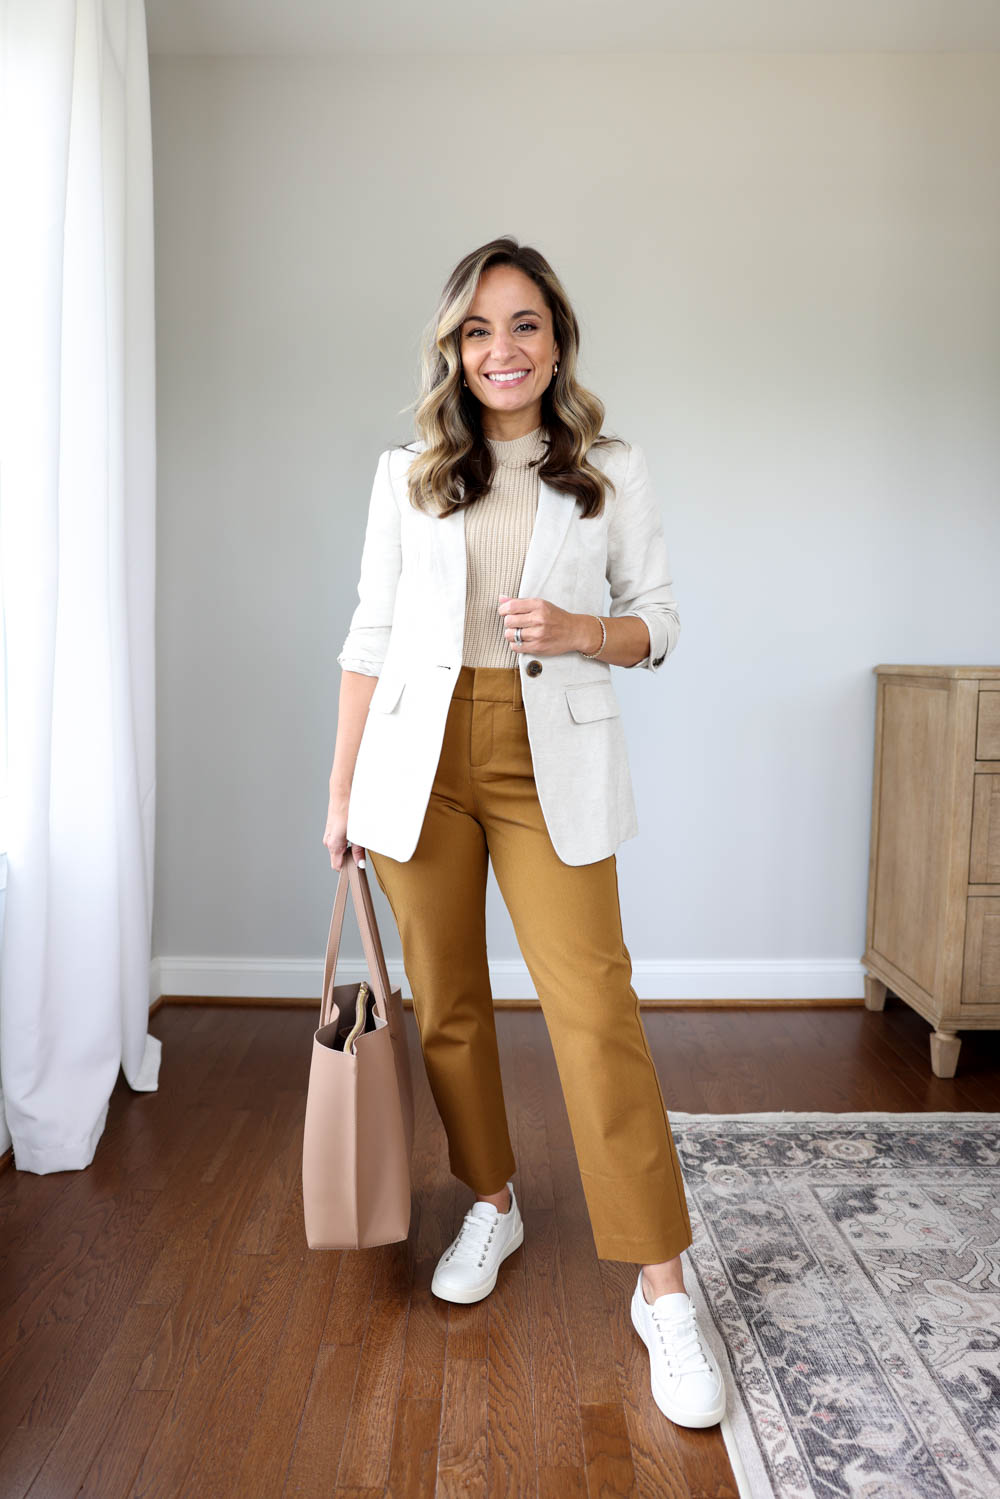 Petite-friendly smart casual outfit idea | summer outfits for work via pumps and push-ups blog | petite style | petite fashion 